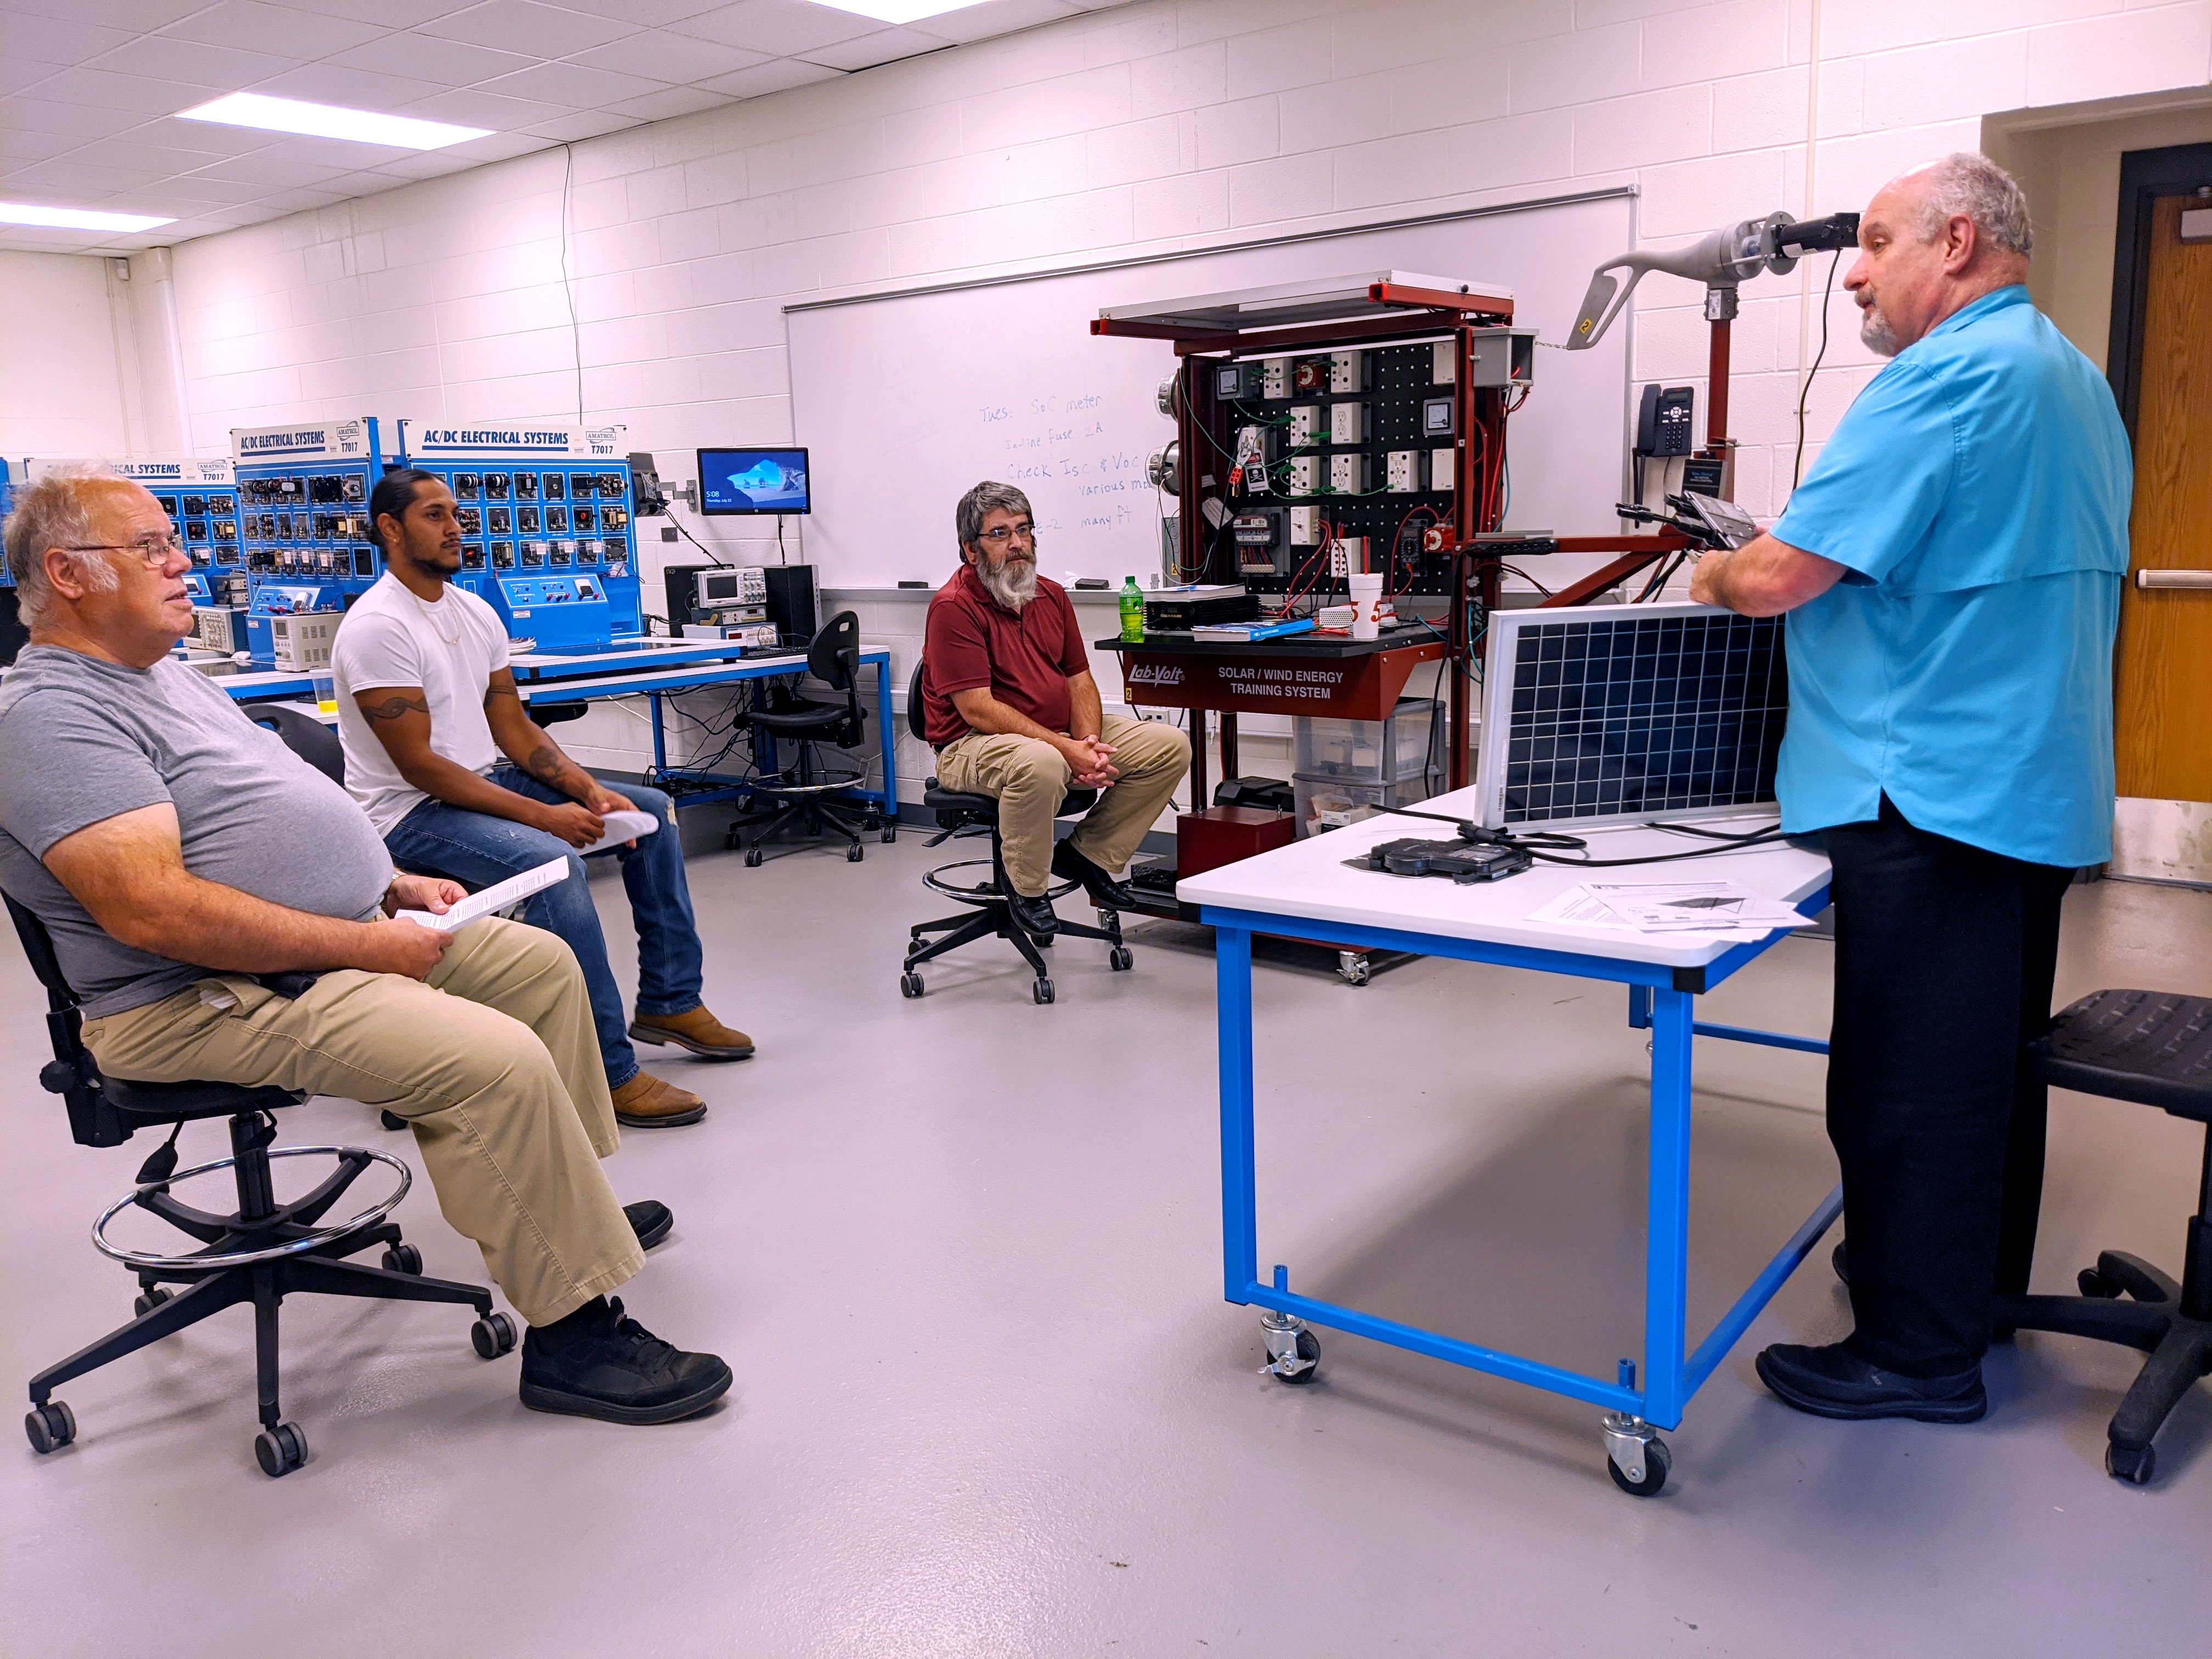 Solar energy class sits in lab